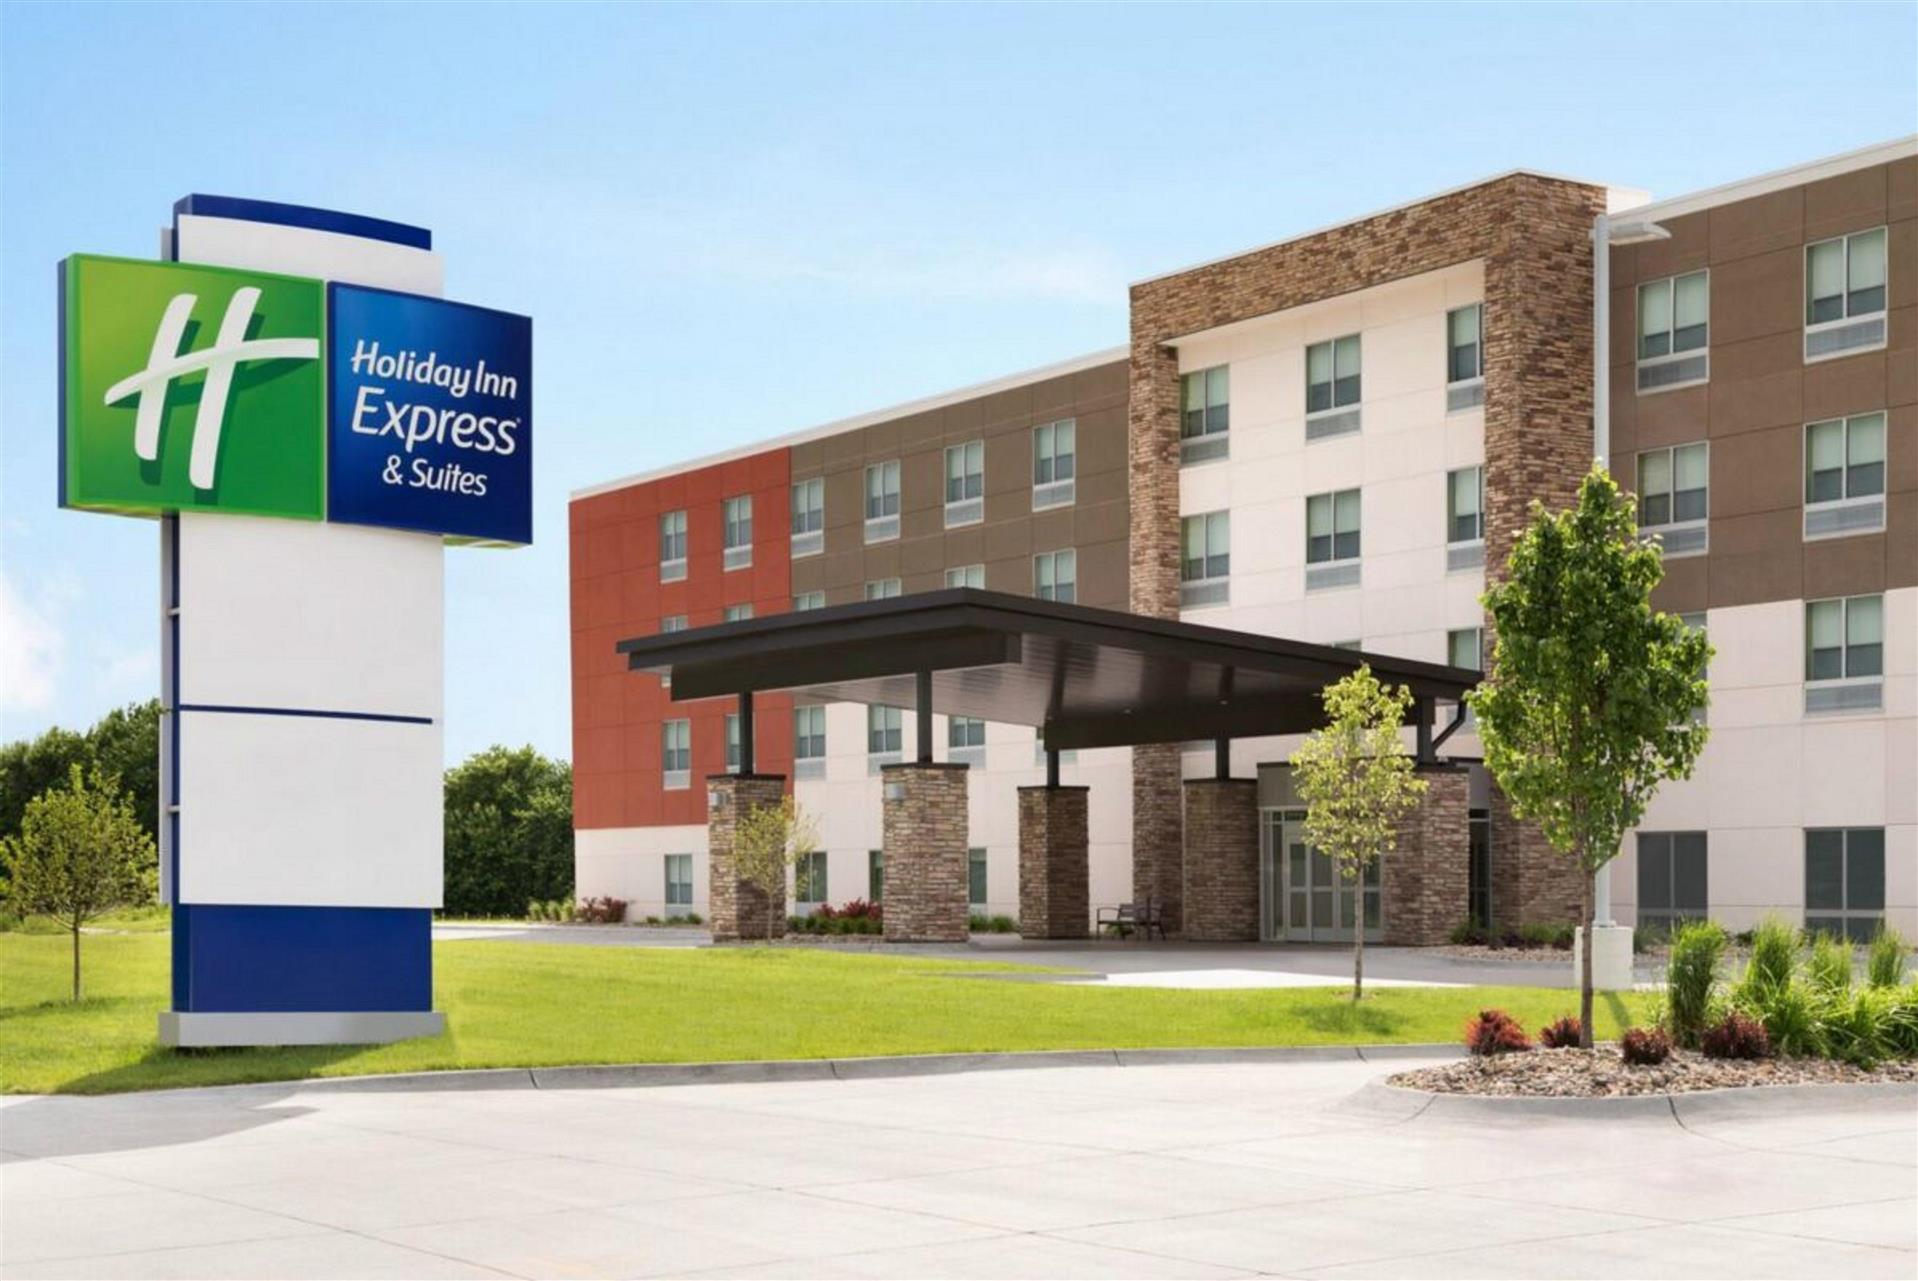 Holiday Inn Express & Suites Austin Airport East in Austin, TX